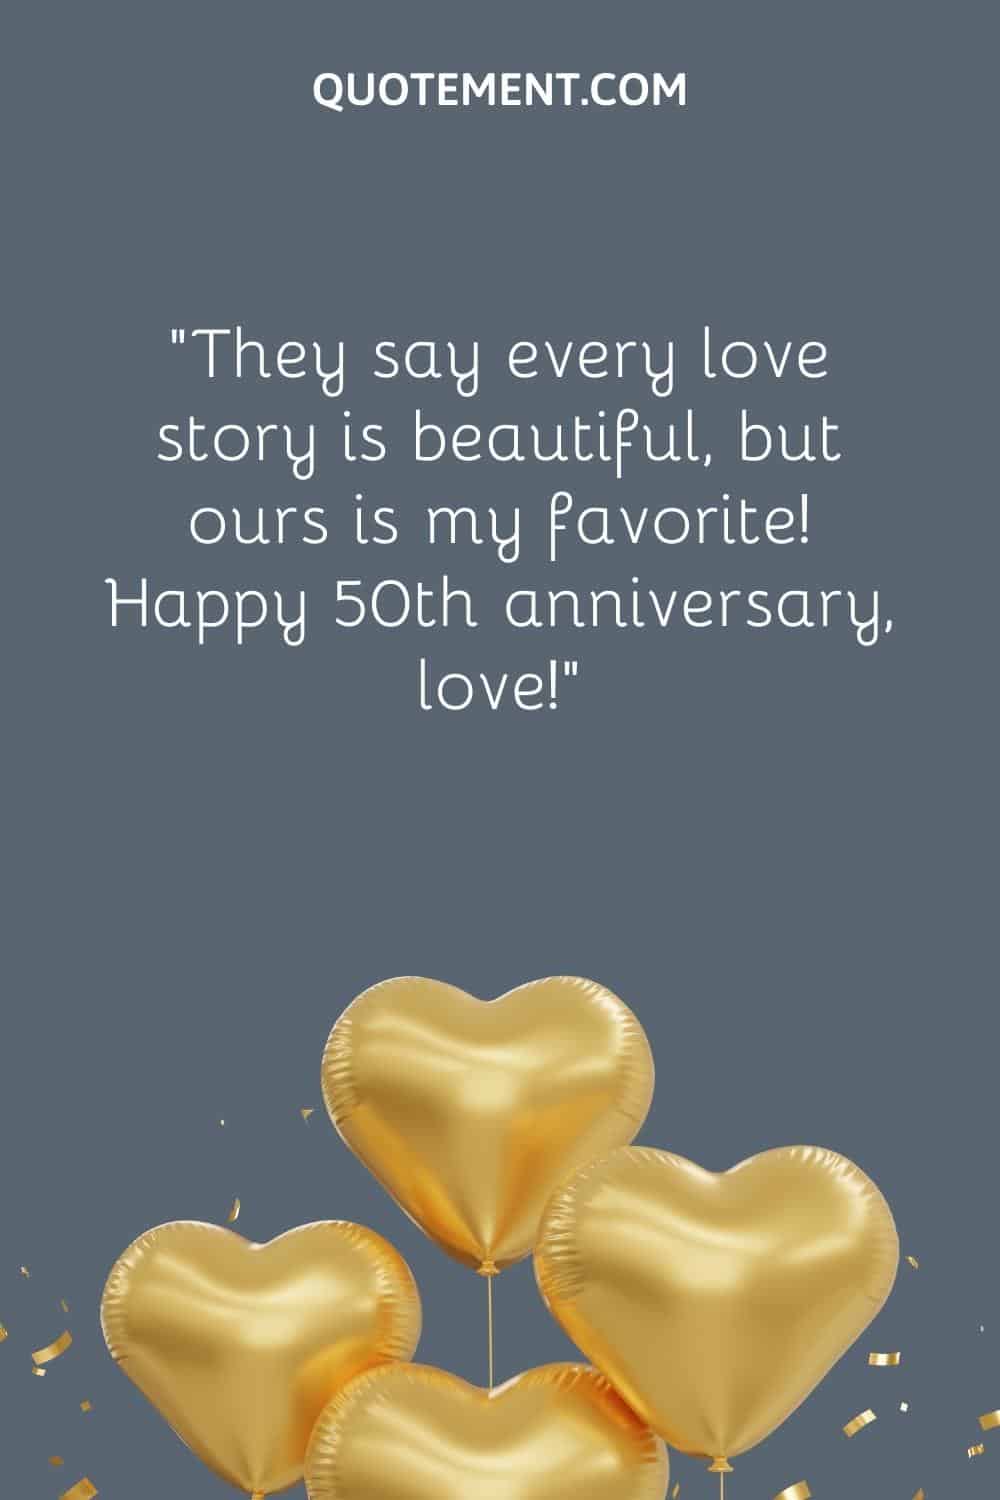 “They say every love story is beautiful, but ours is my favorite! Happy 50th anniversary, love!”